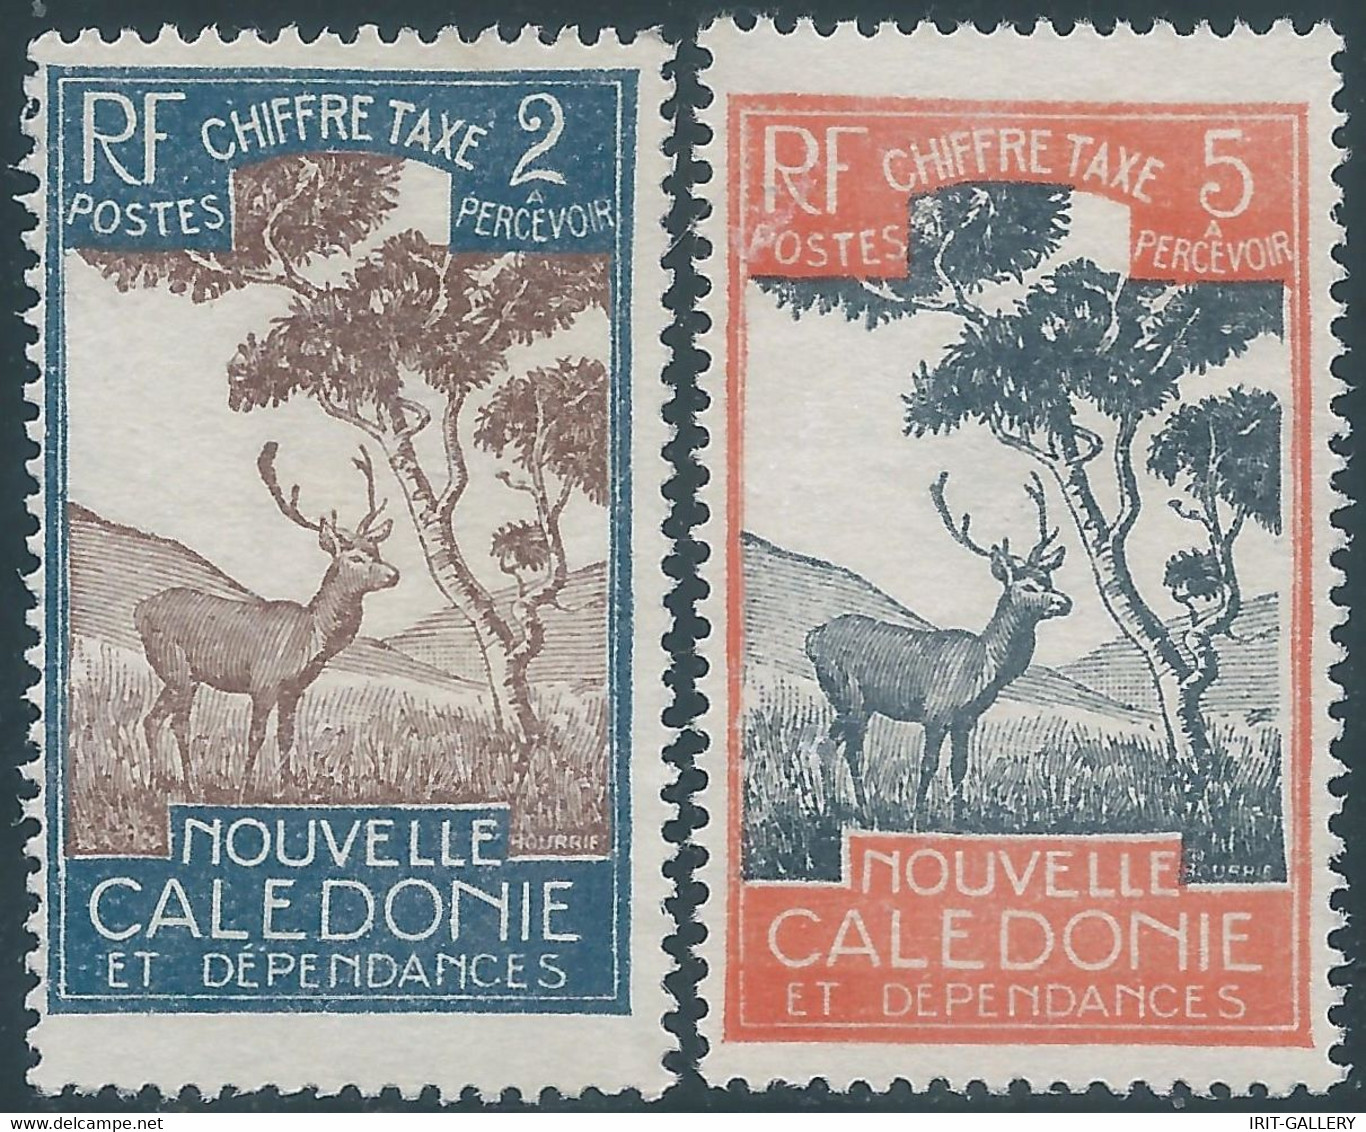 FRANCE,Calédonie - New Caledonia,1920 CHIFFER TAXE,Revenue Stamps Fiscal Tax,2 & 5F,Mint - Segnatasse